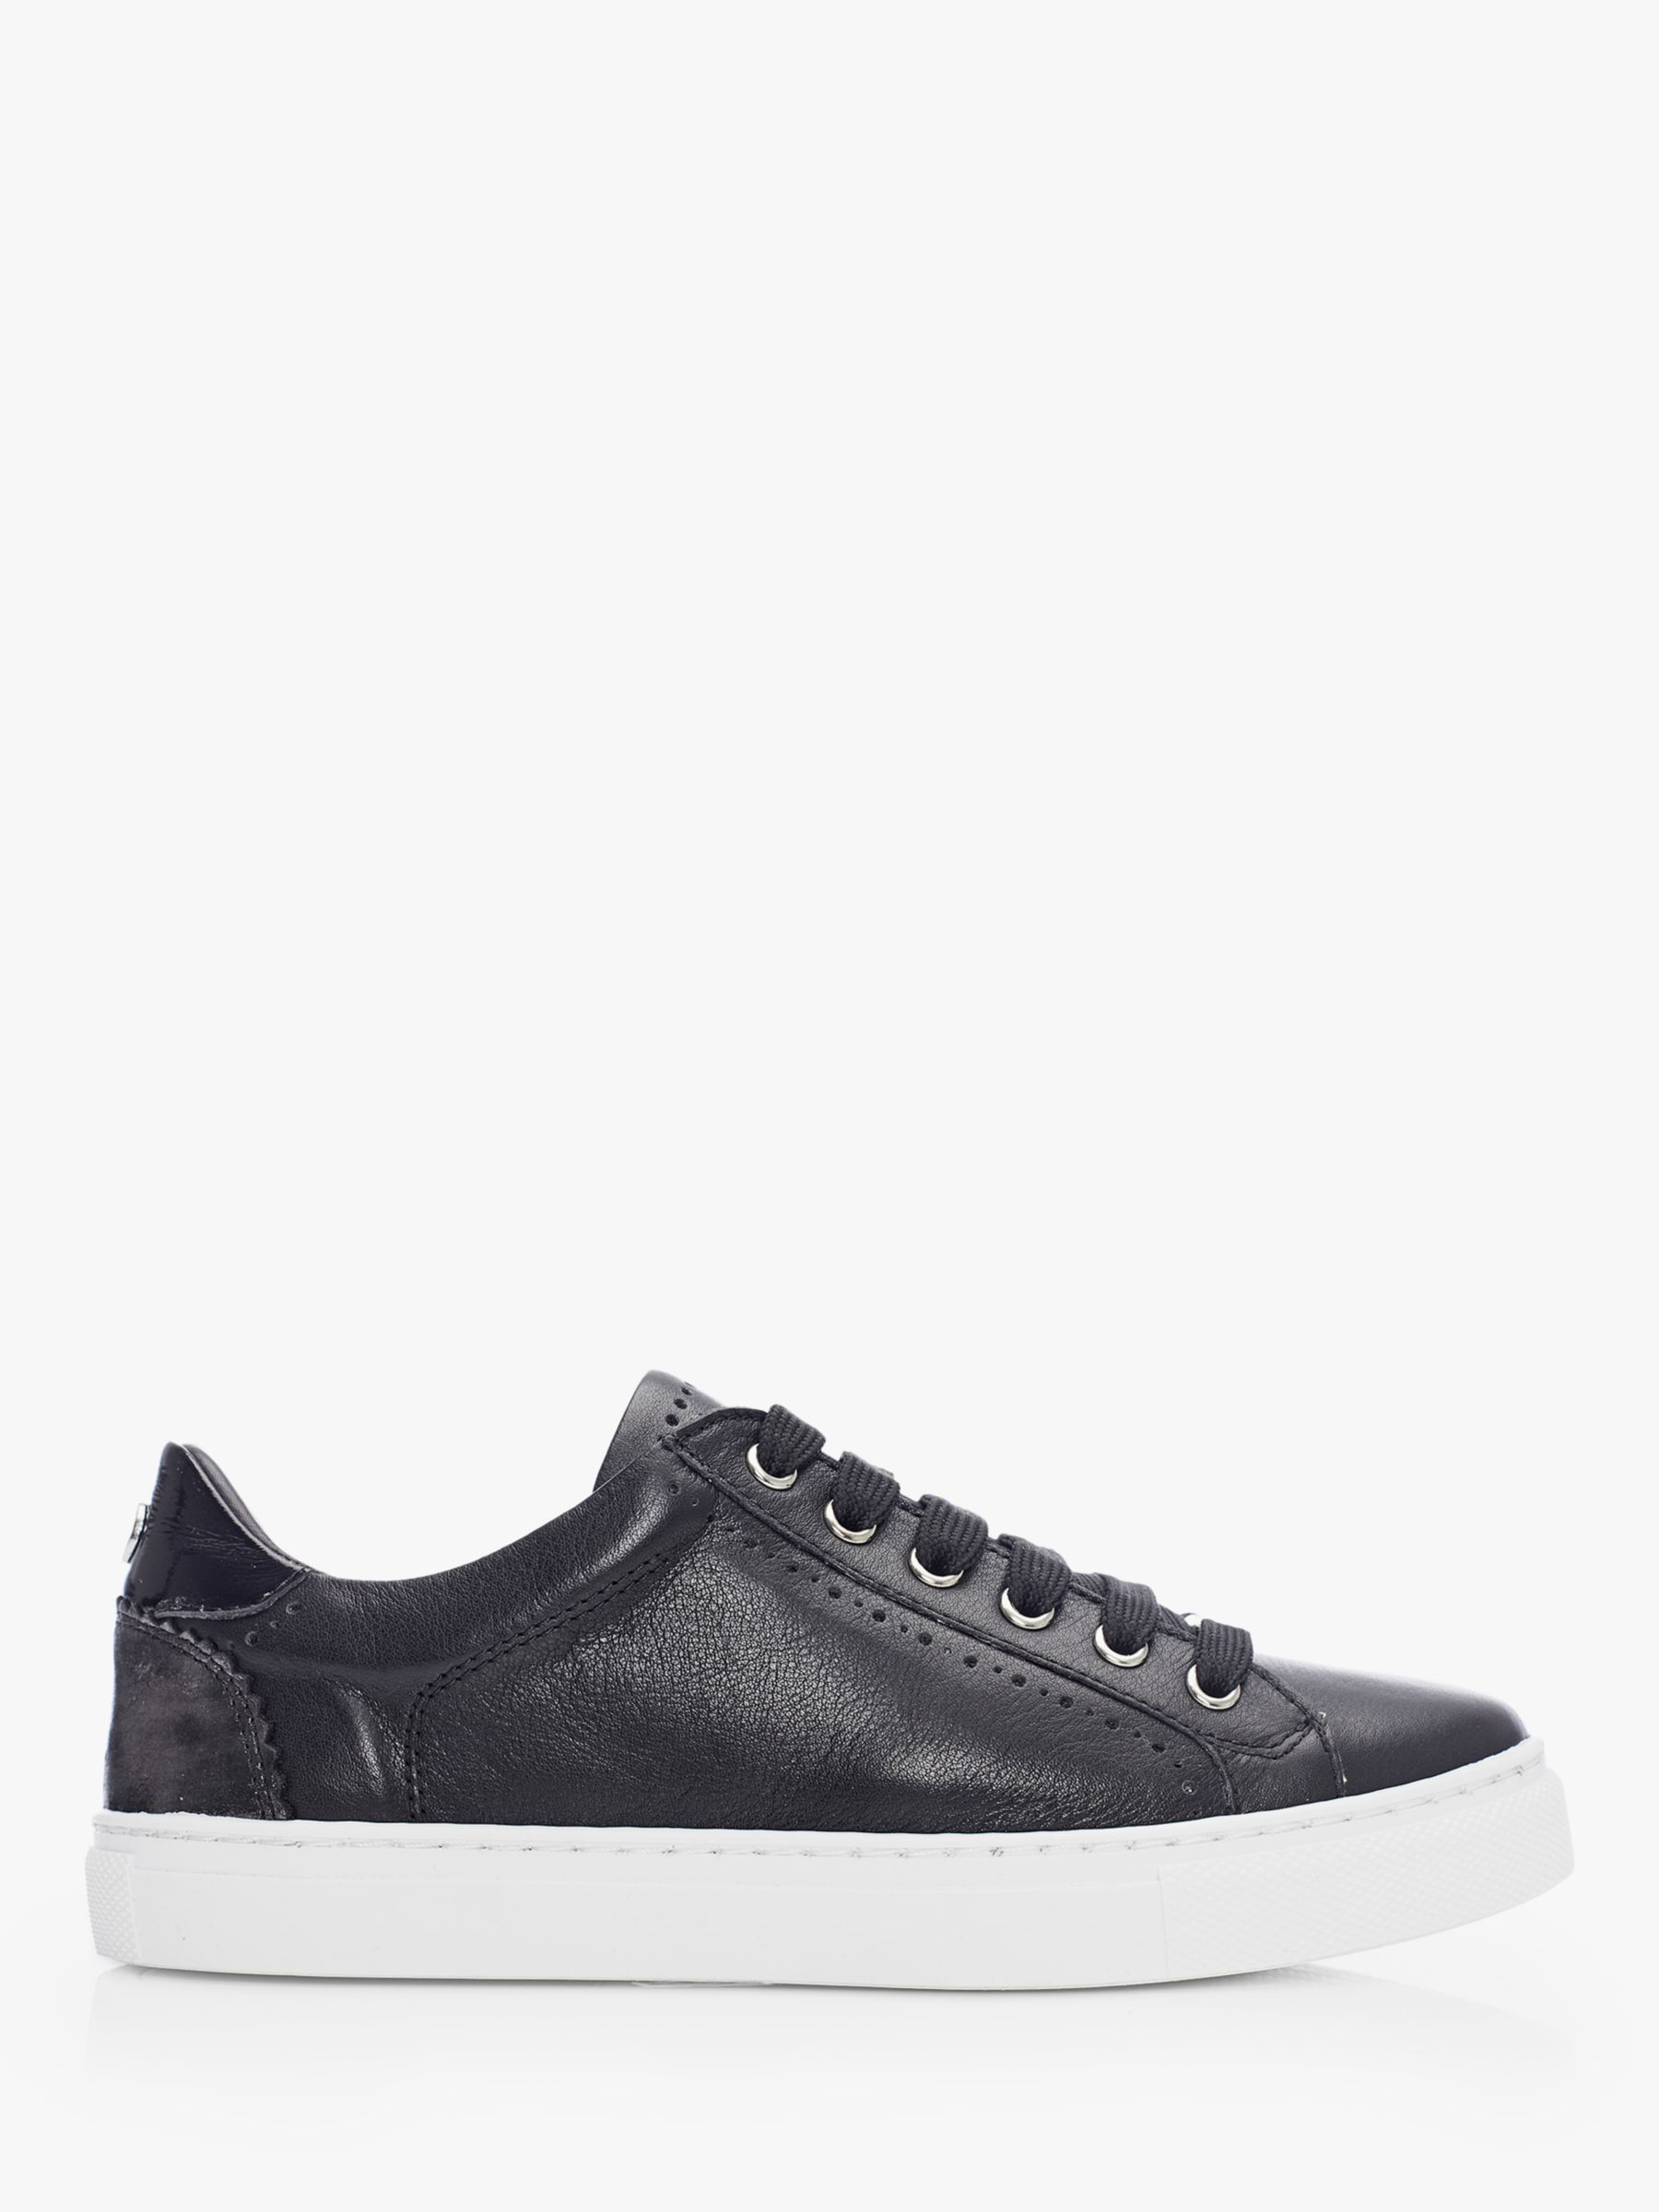 Moda in Pelle Anatoli Leather Lace Up Trainers, Black at John Lewis ...